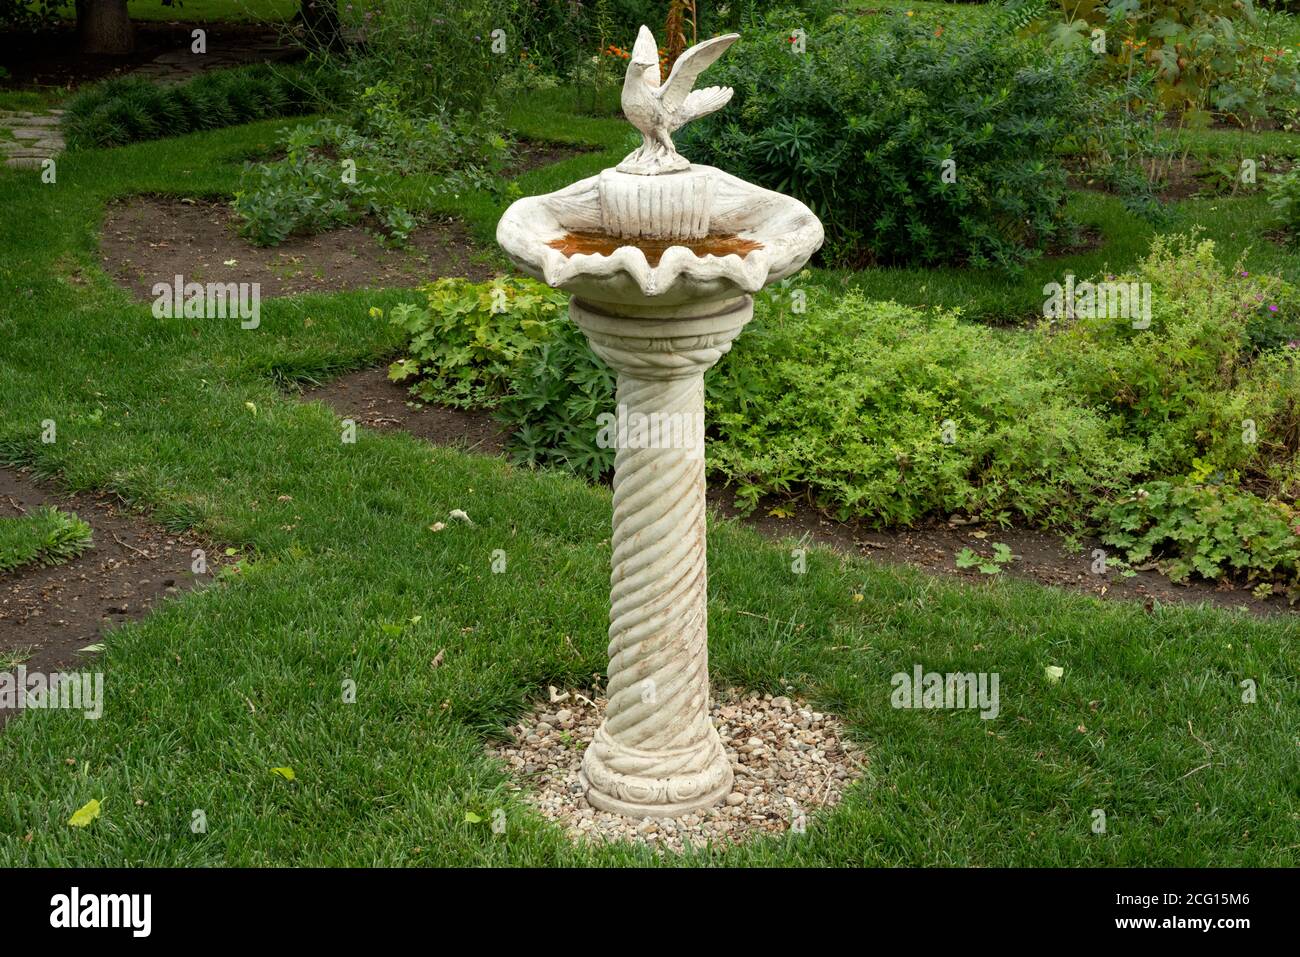 Unique and antique ornamental tall cast stone concrete bird bath or birdbath and water fountain with pigeon figurine as garden decoration Stock Photo